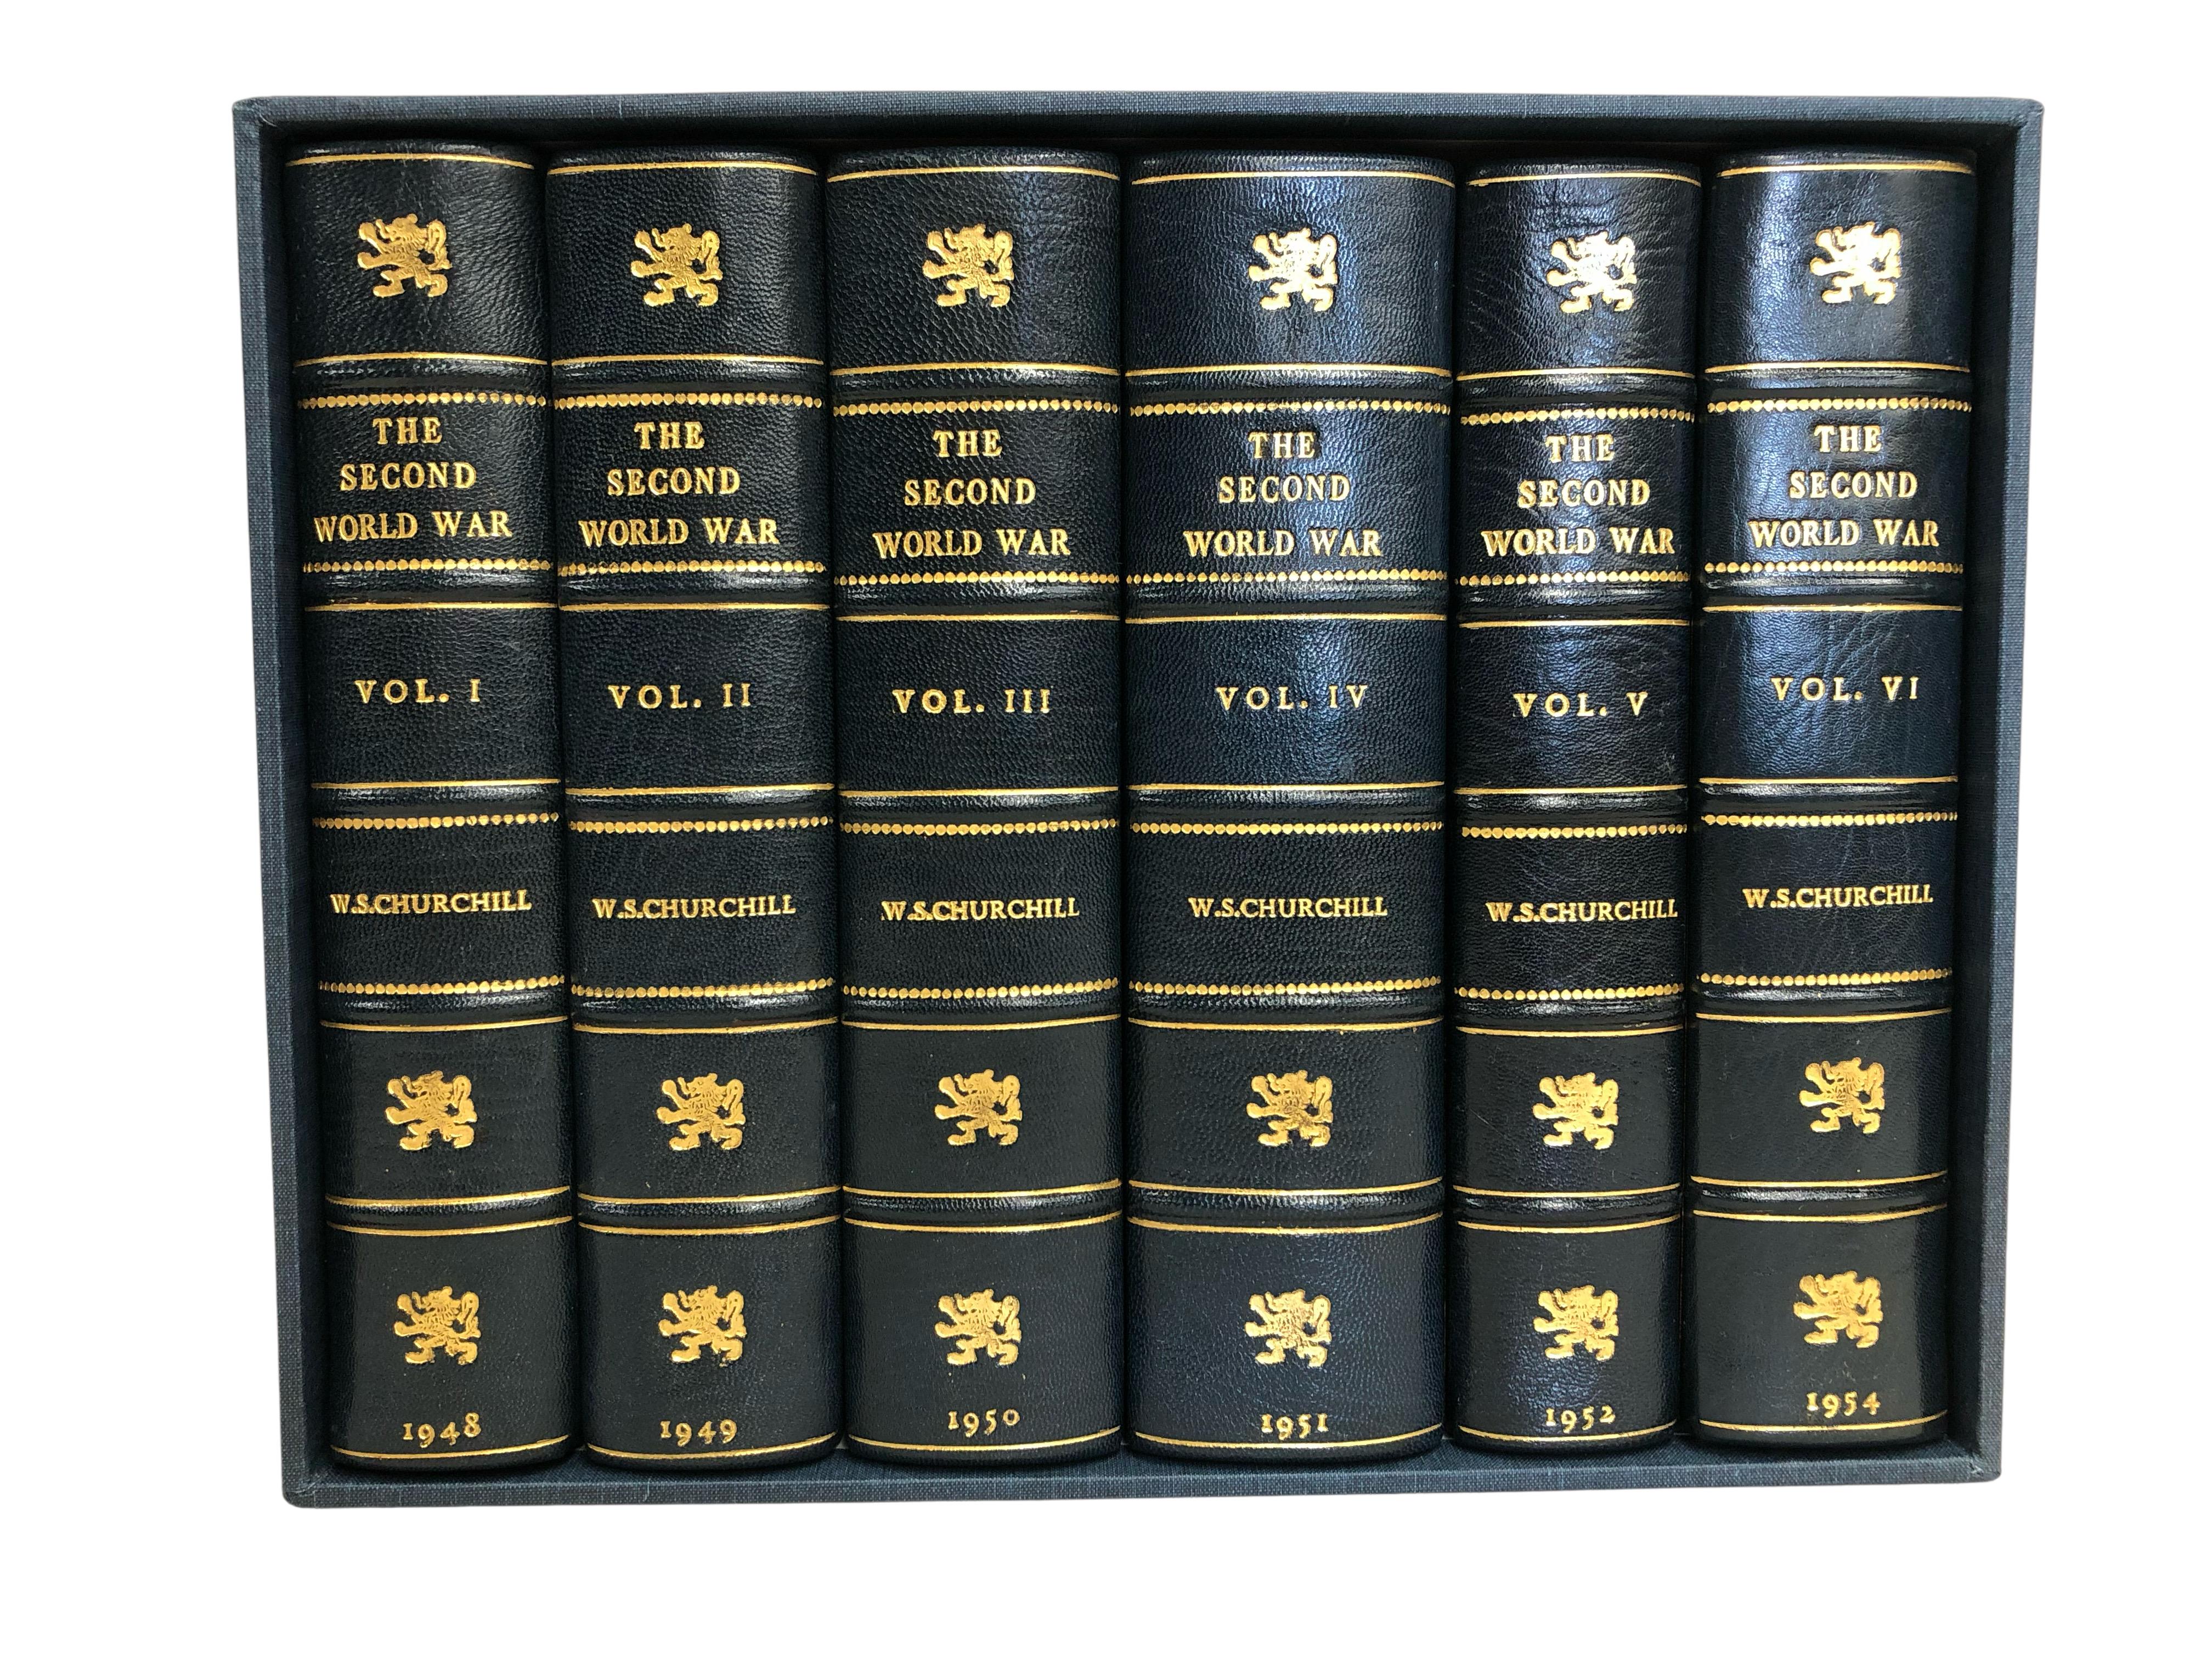 Churchill, Winston, The Second World War. London, 1948-1954: Cassell & Co. Ltd. First editions, 6 vols. Bound by in full navy Moroccan leather with raised bands, gilt titles, and tooling to spines. Tipped in signed and inscribed thank you note from